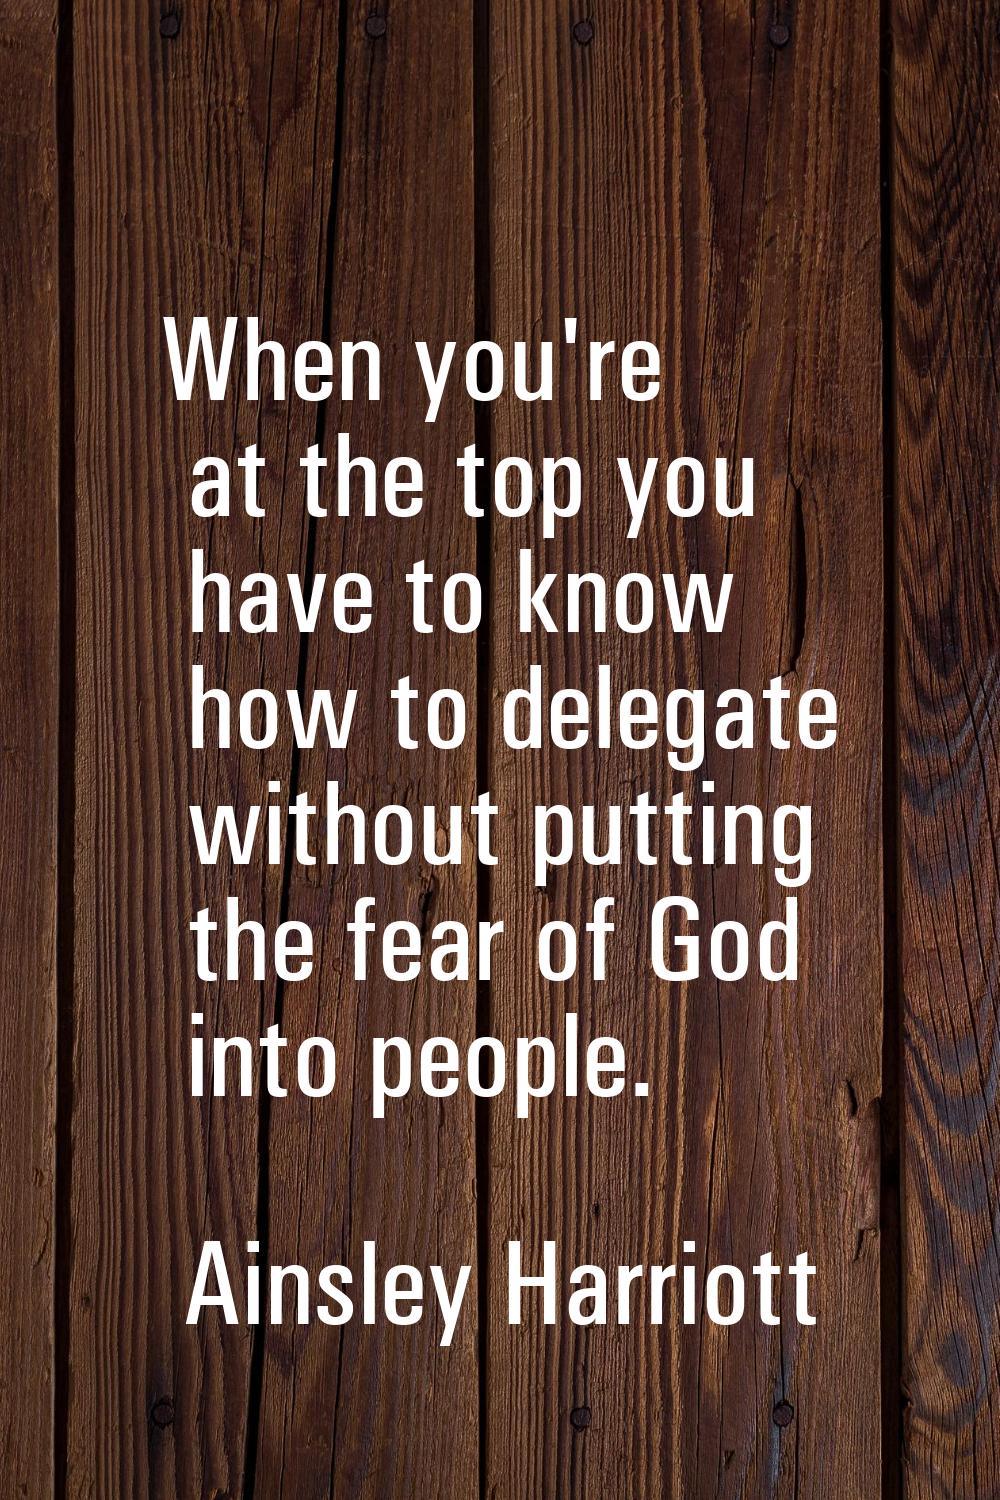 When you're at the top you have to know how to delegate without putting the fear of God into people